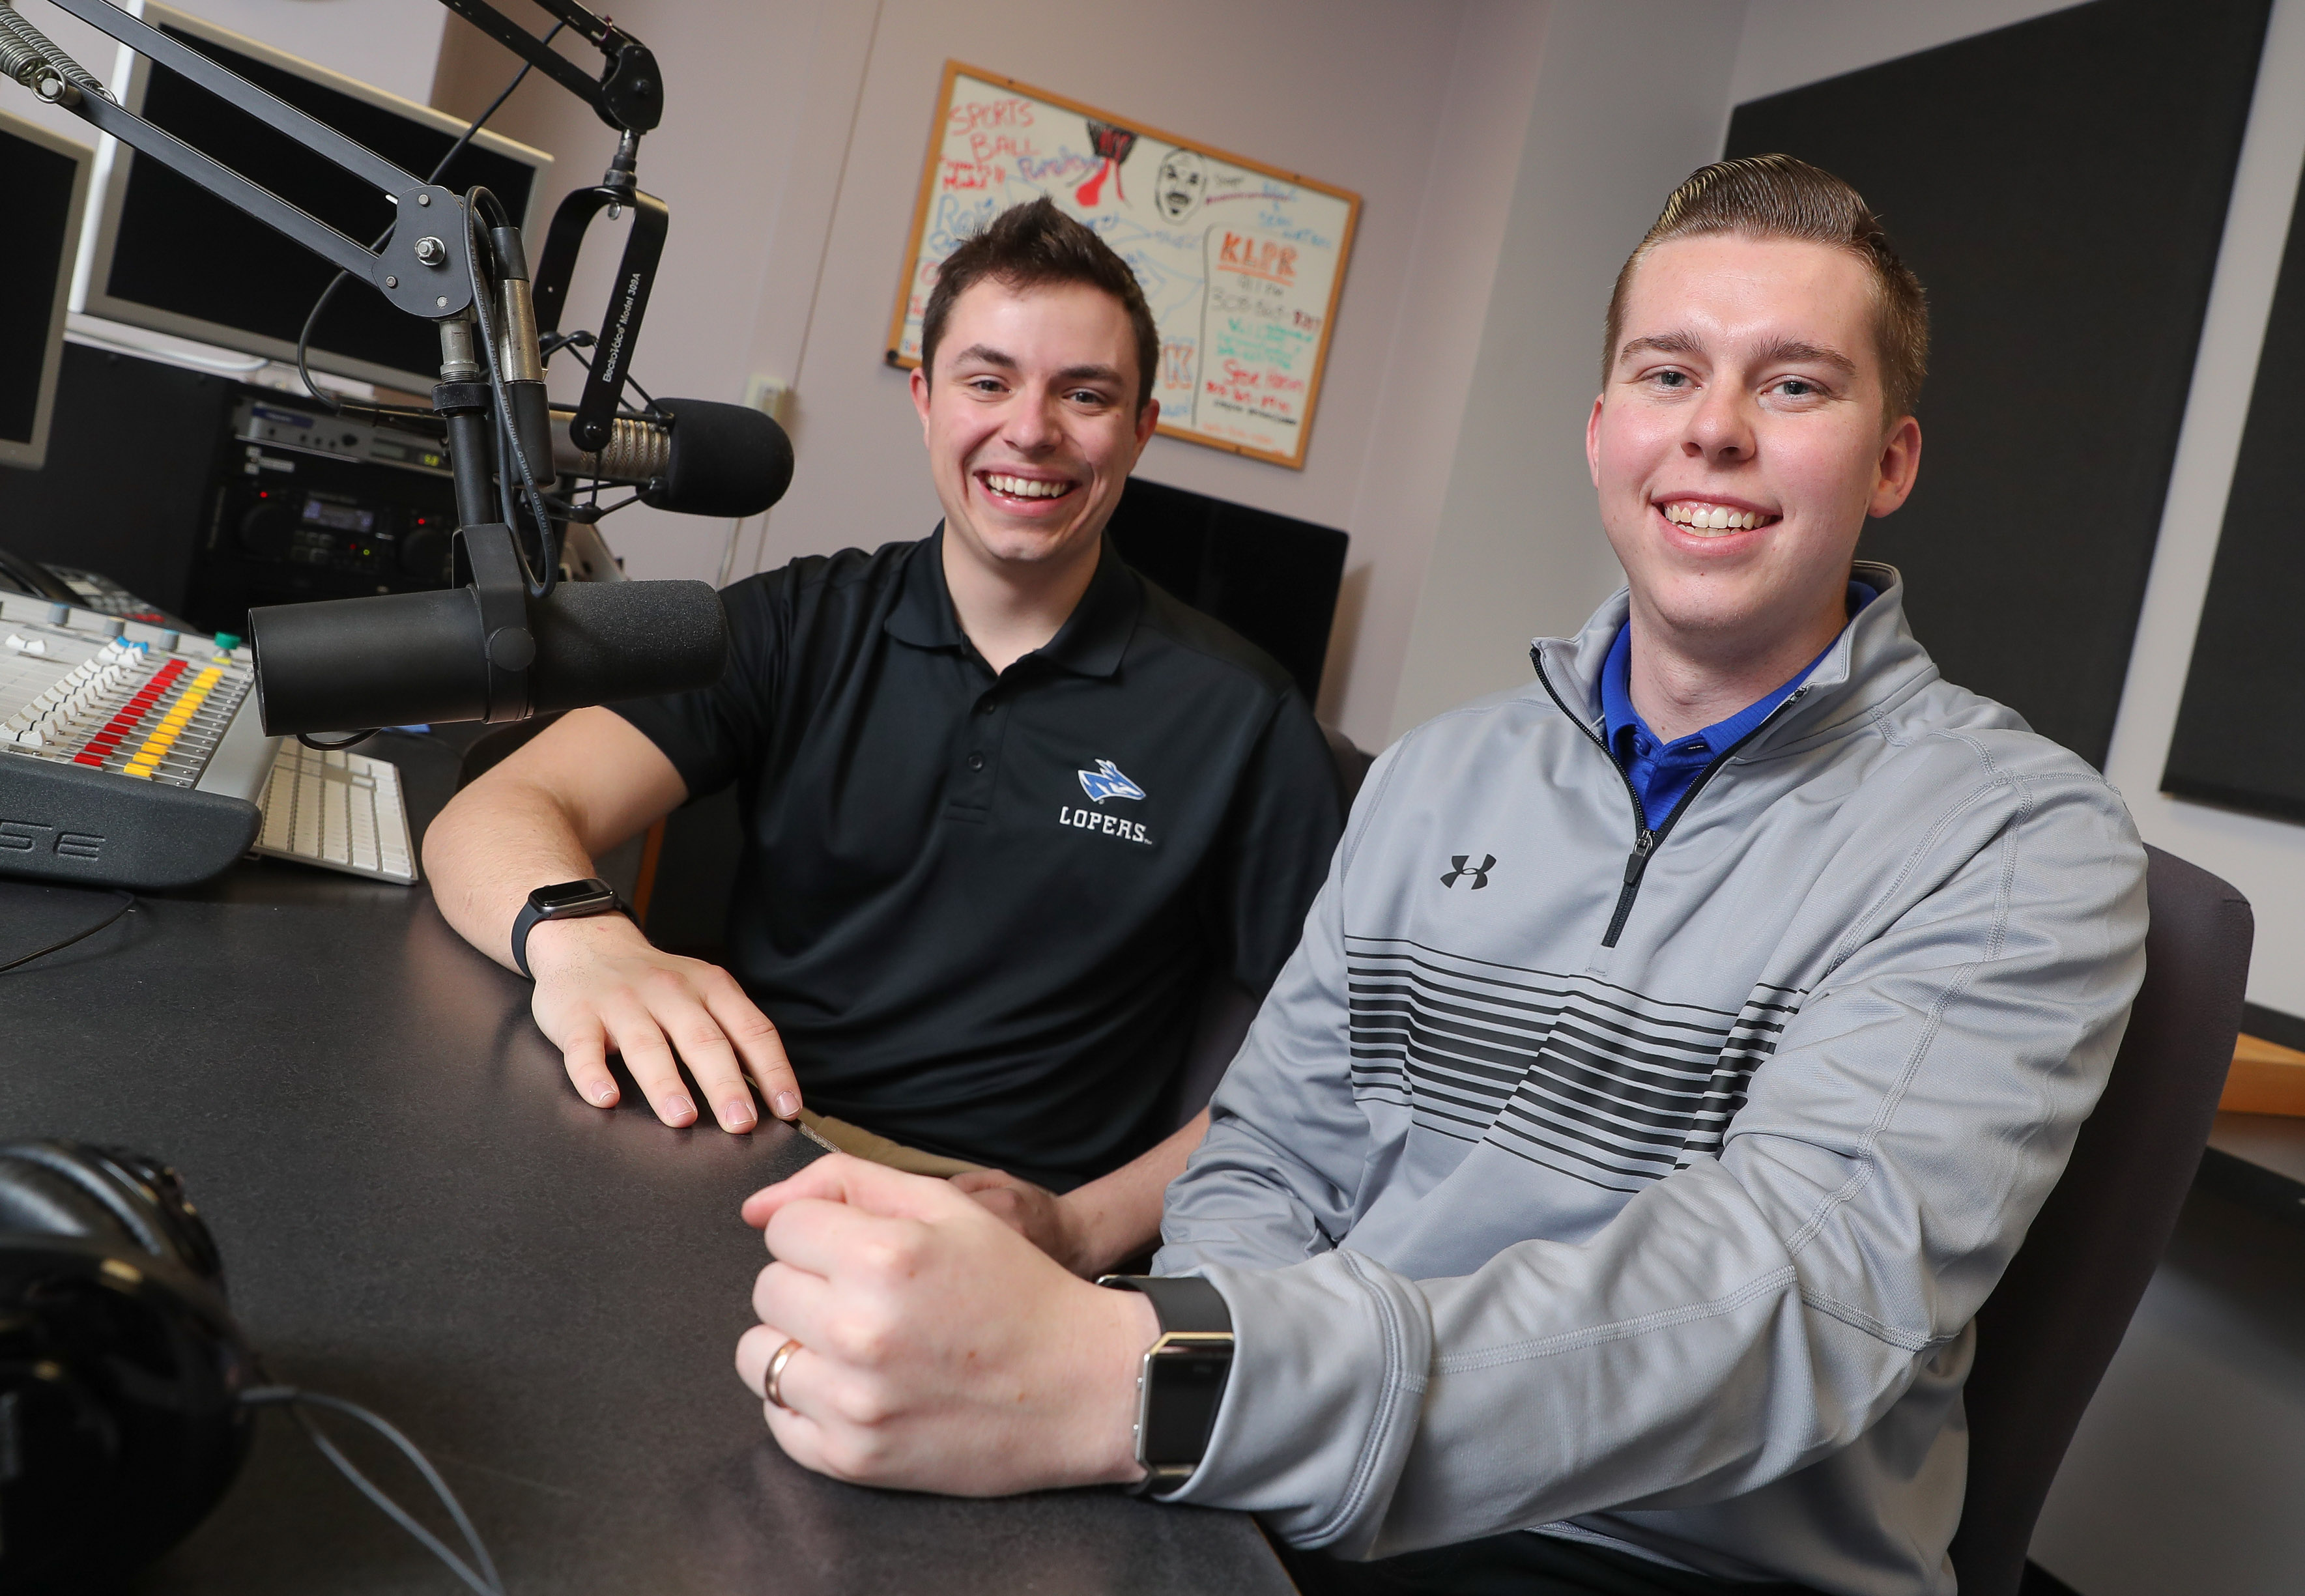 UNK students Austin Jacobsen, left, and Evan Jones are co-sports directors for KLPR 91.1 FM, the campus radio station. (Photo by Corbey R. Dorsey, UNK Communications)